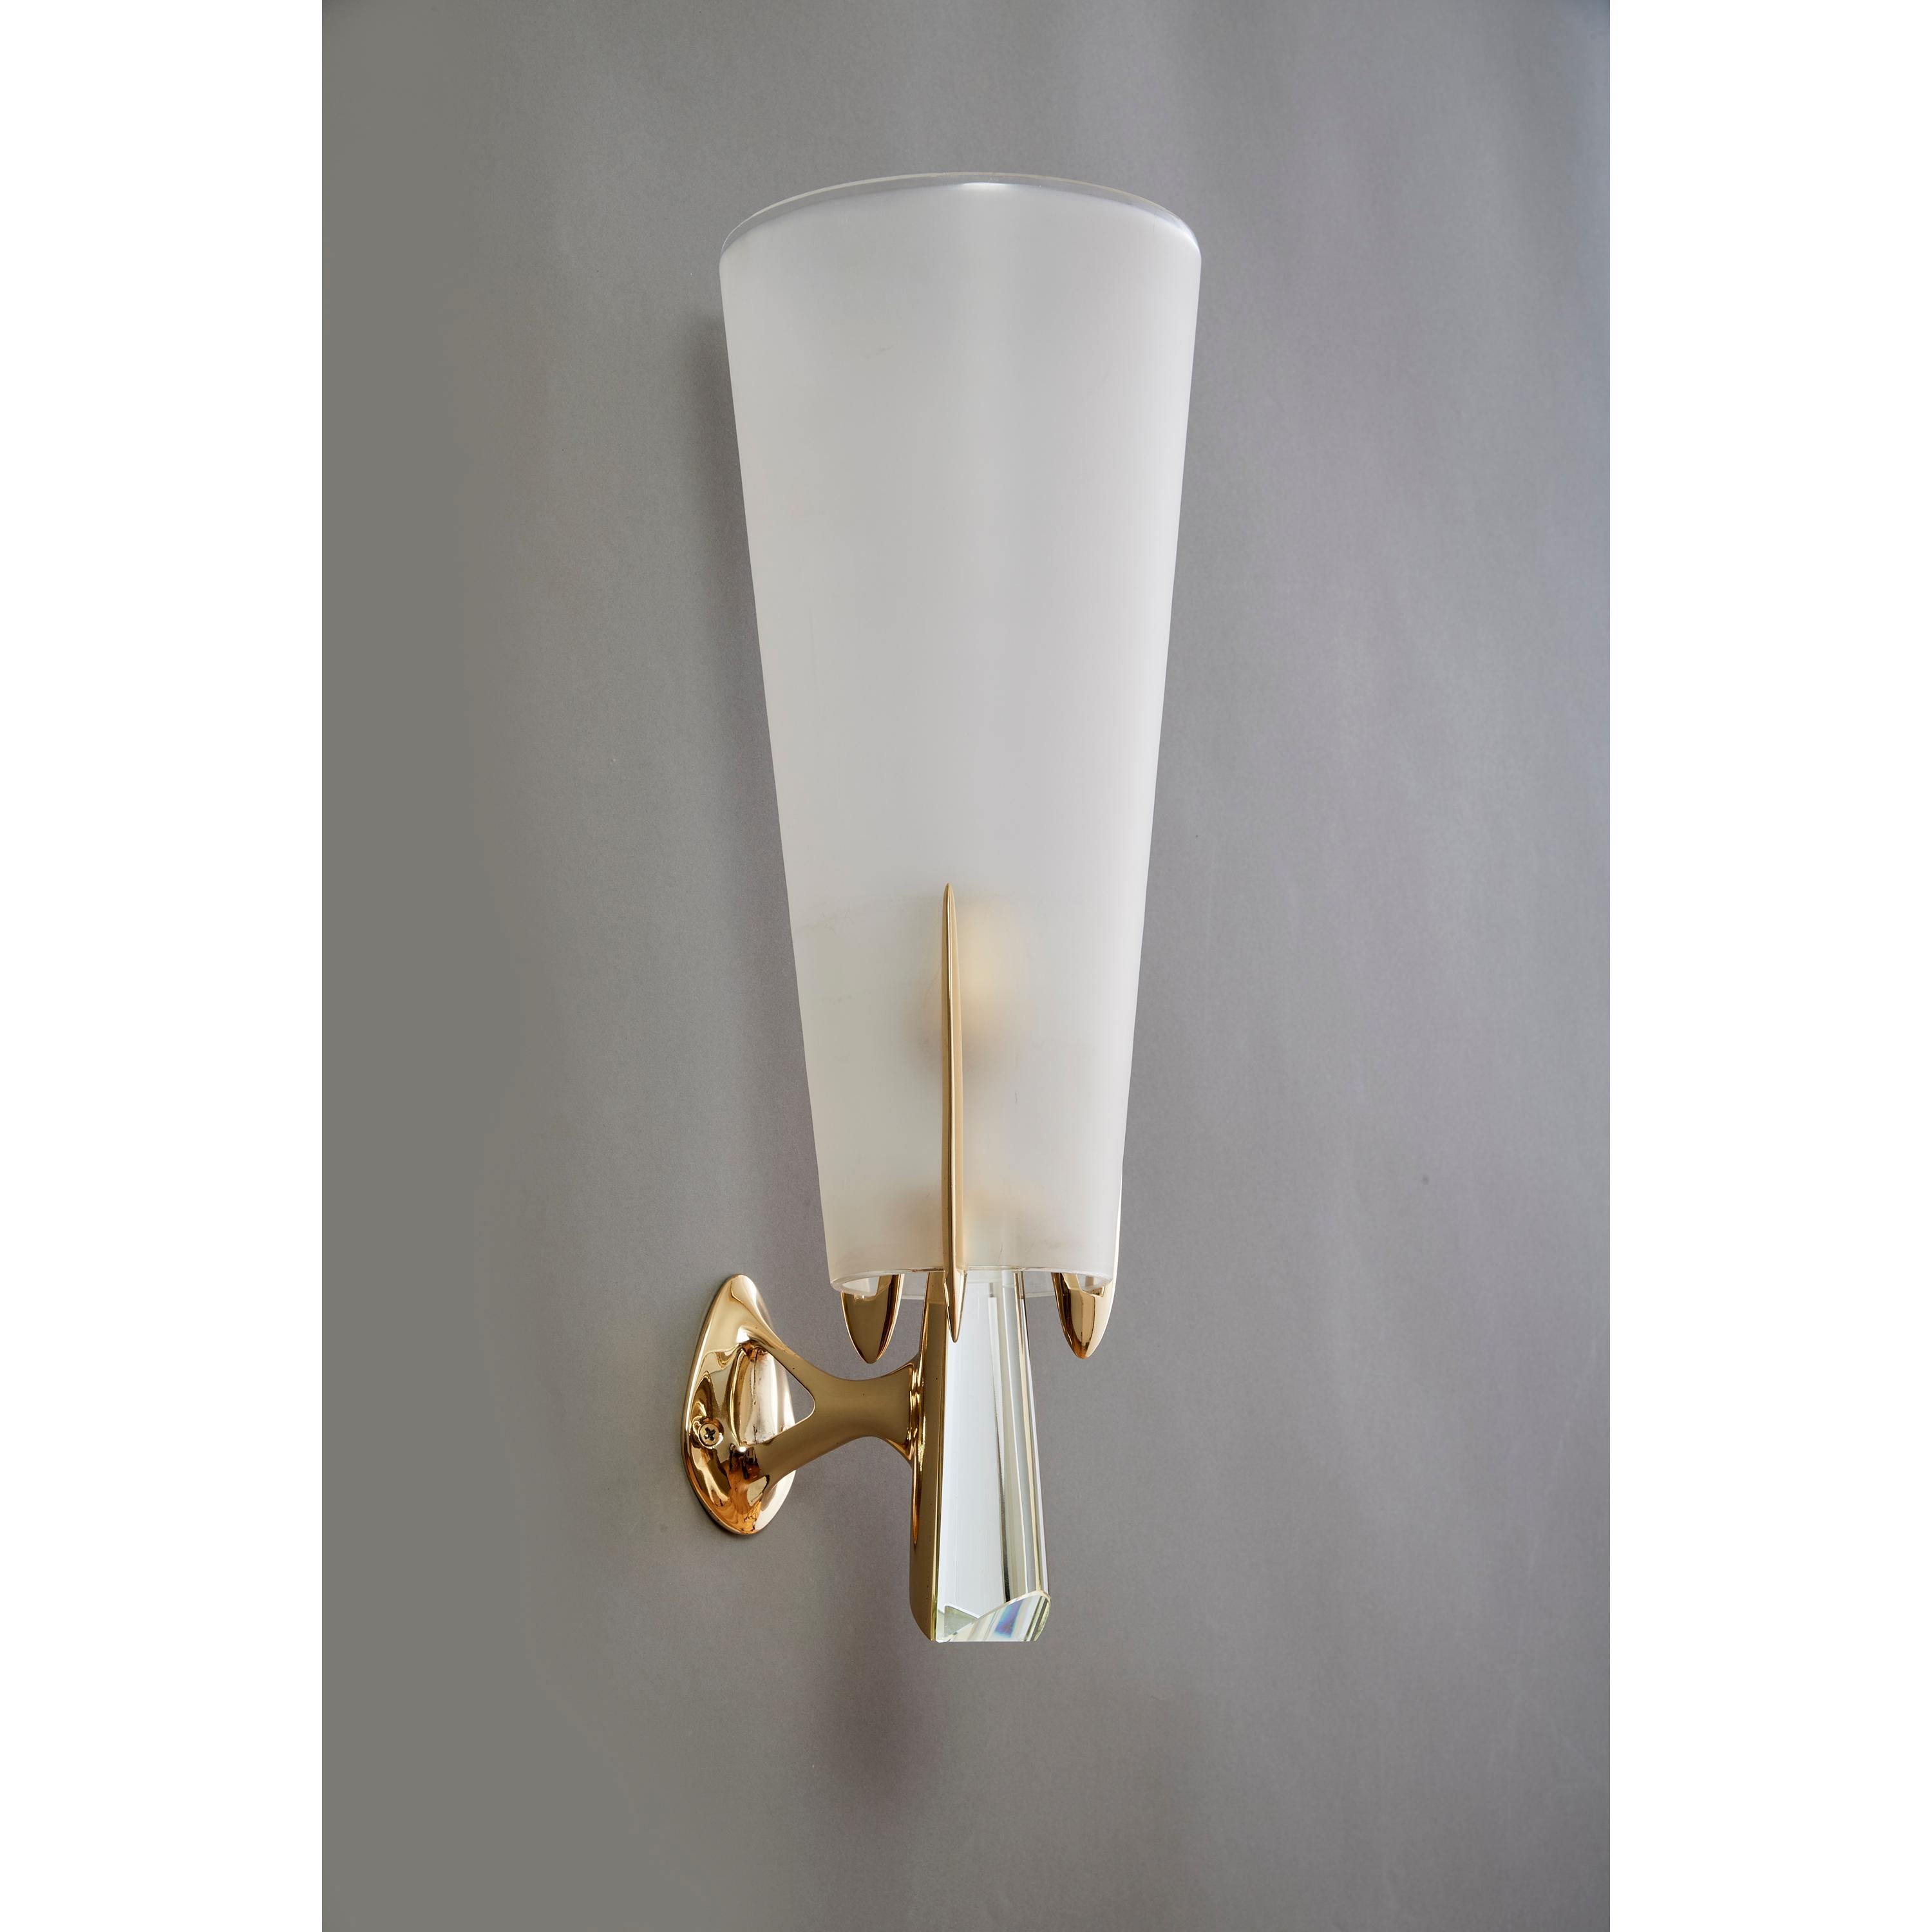 Mid-20th Century Max Ingrand for Fontana Arte: Rare Sconces in Brass and Crystal, Italy 1955 For Sale